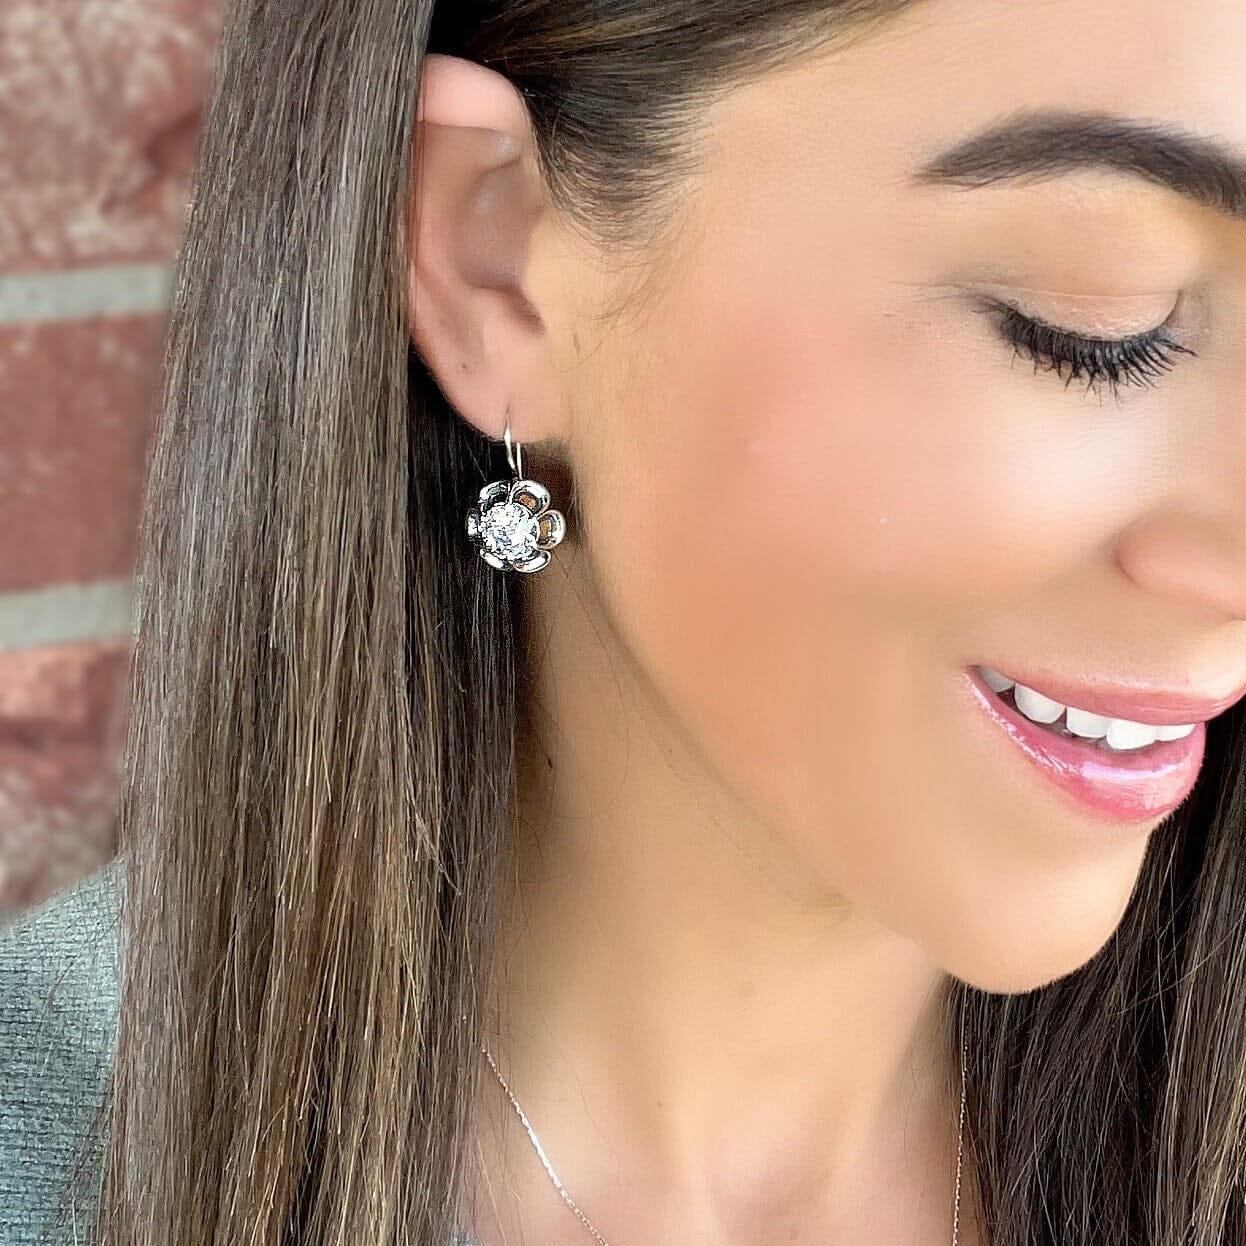 silver secured back flower earrings with cz center